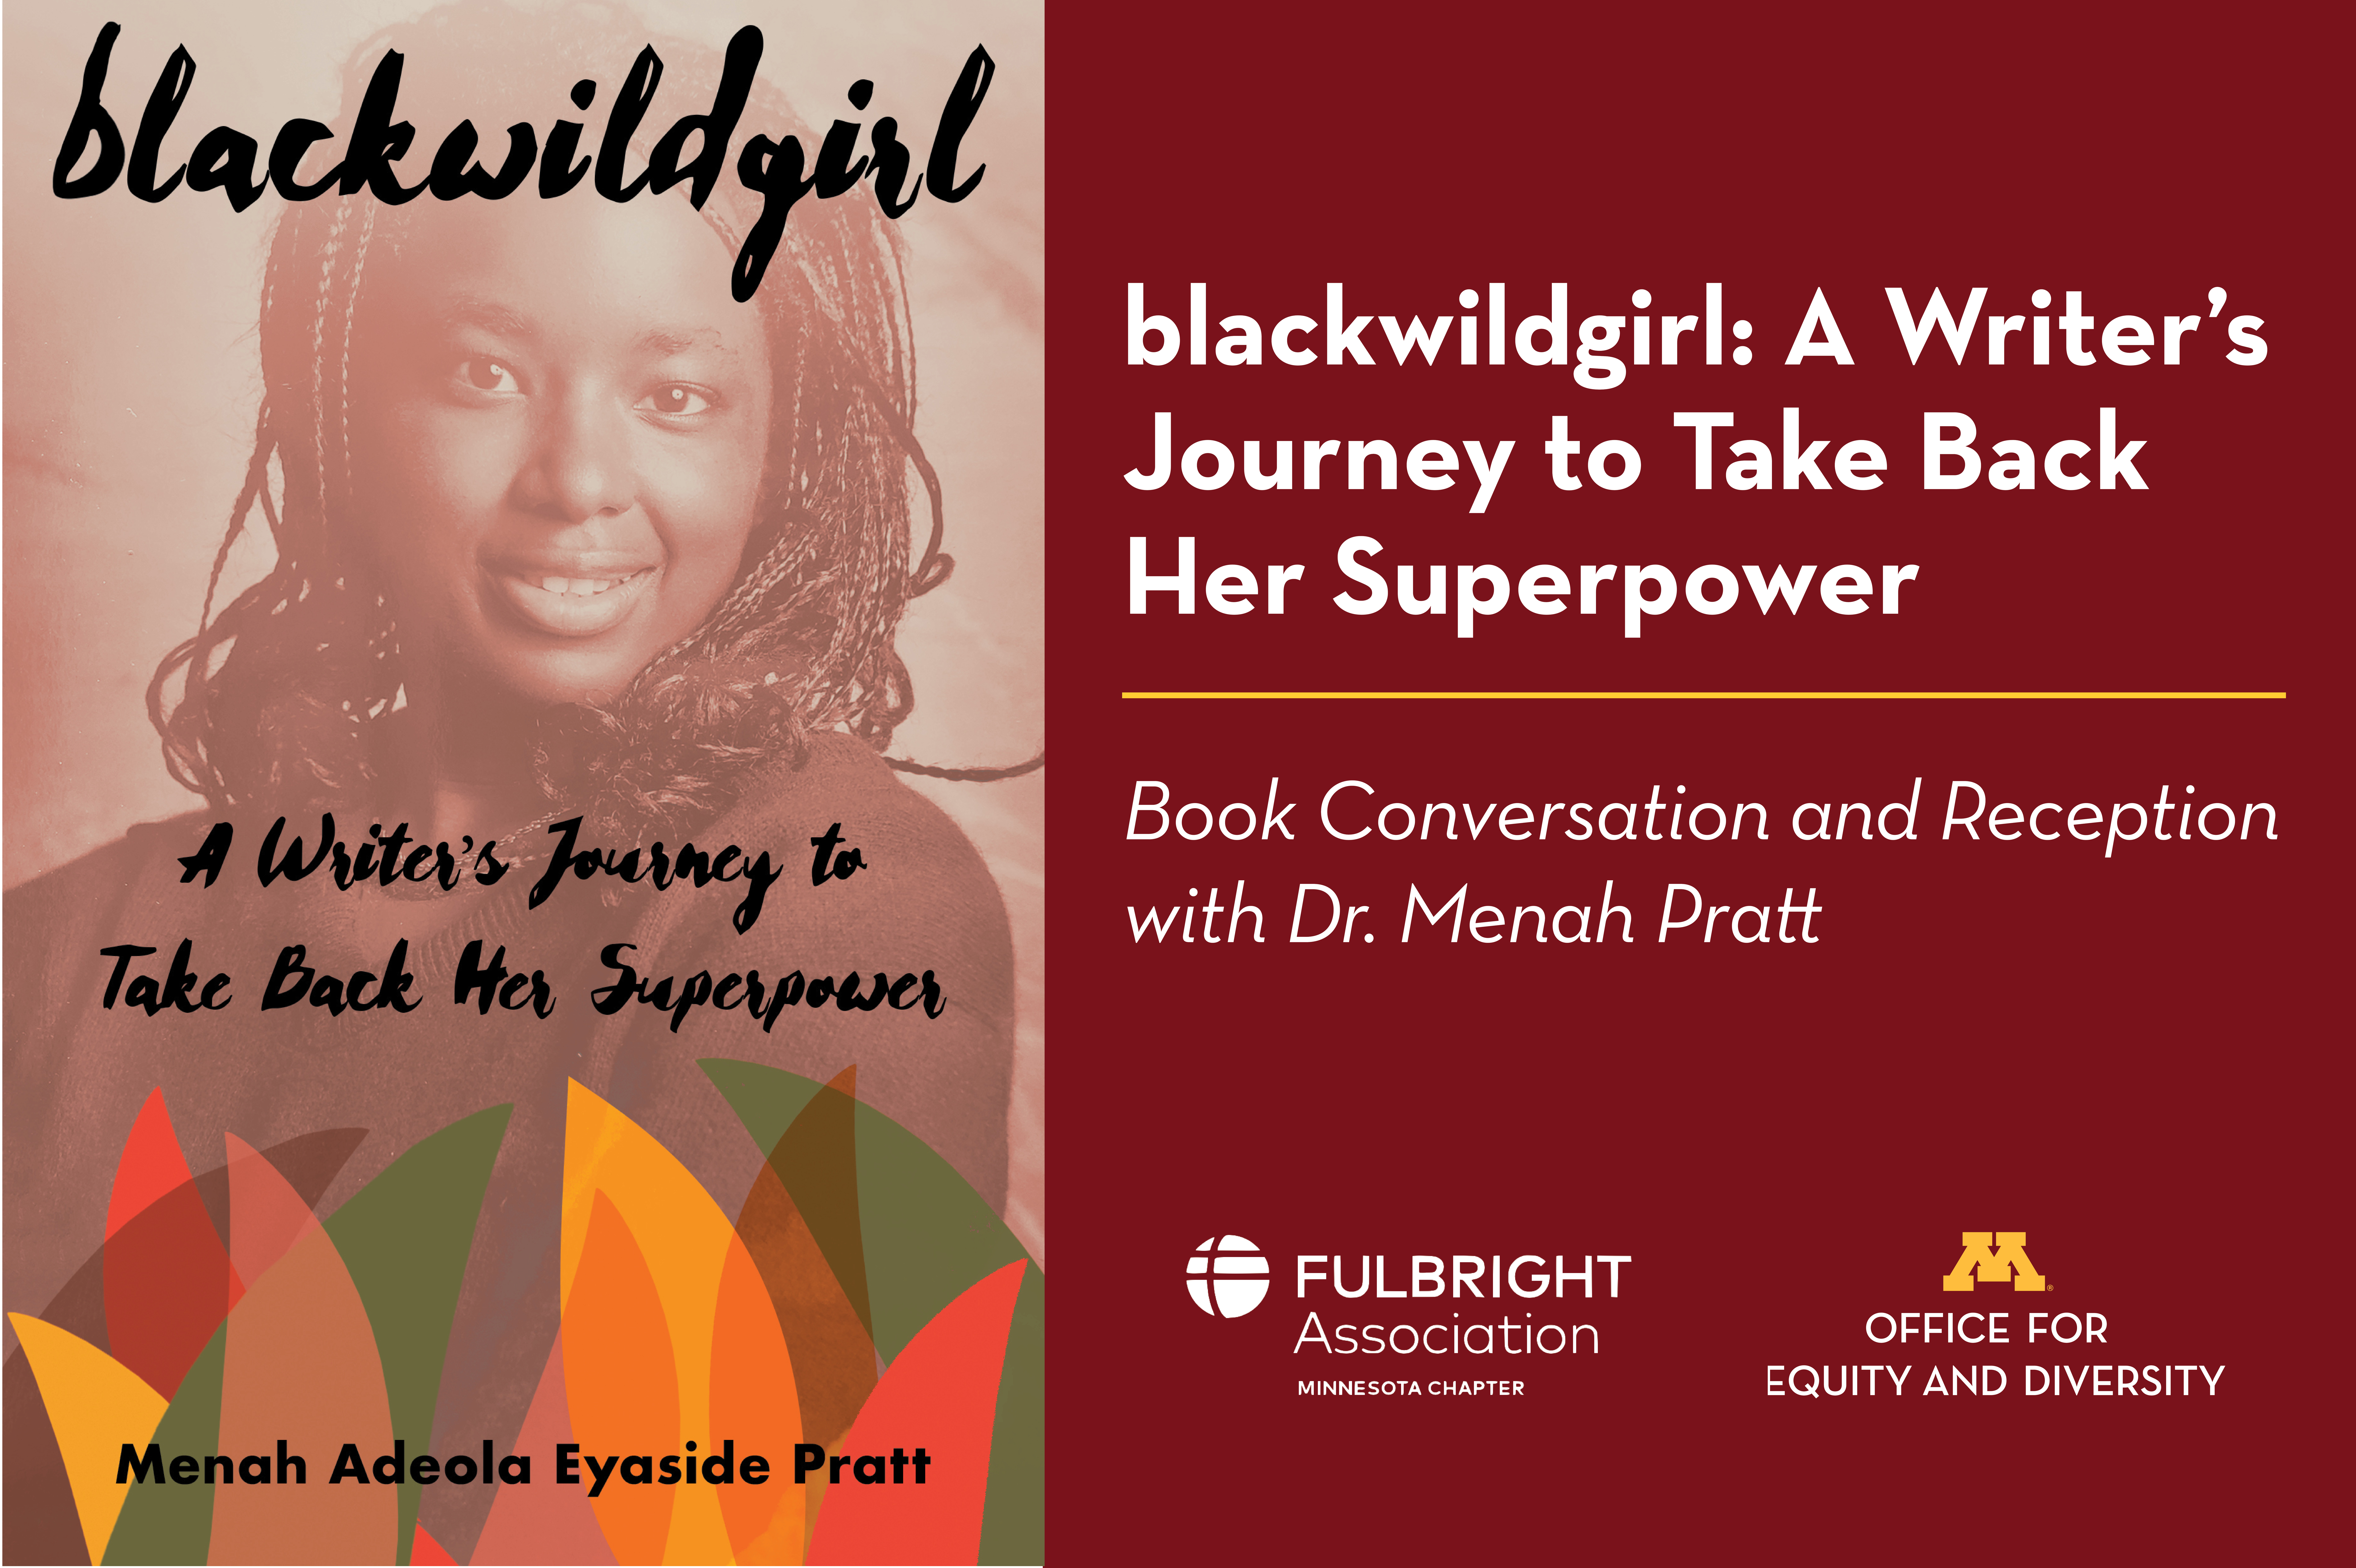 Cover of blackwildgirl by Dr. Menah Pratt with text that reads "blackwildgirl: A Writer’s Journey to Take Back Her Superpower, Book Conversation and Reception with Dr. Menah Pratt"